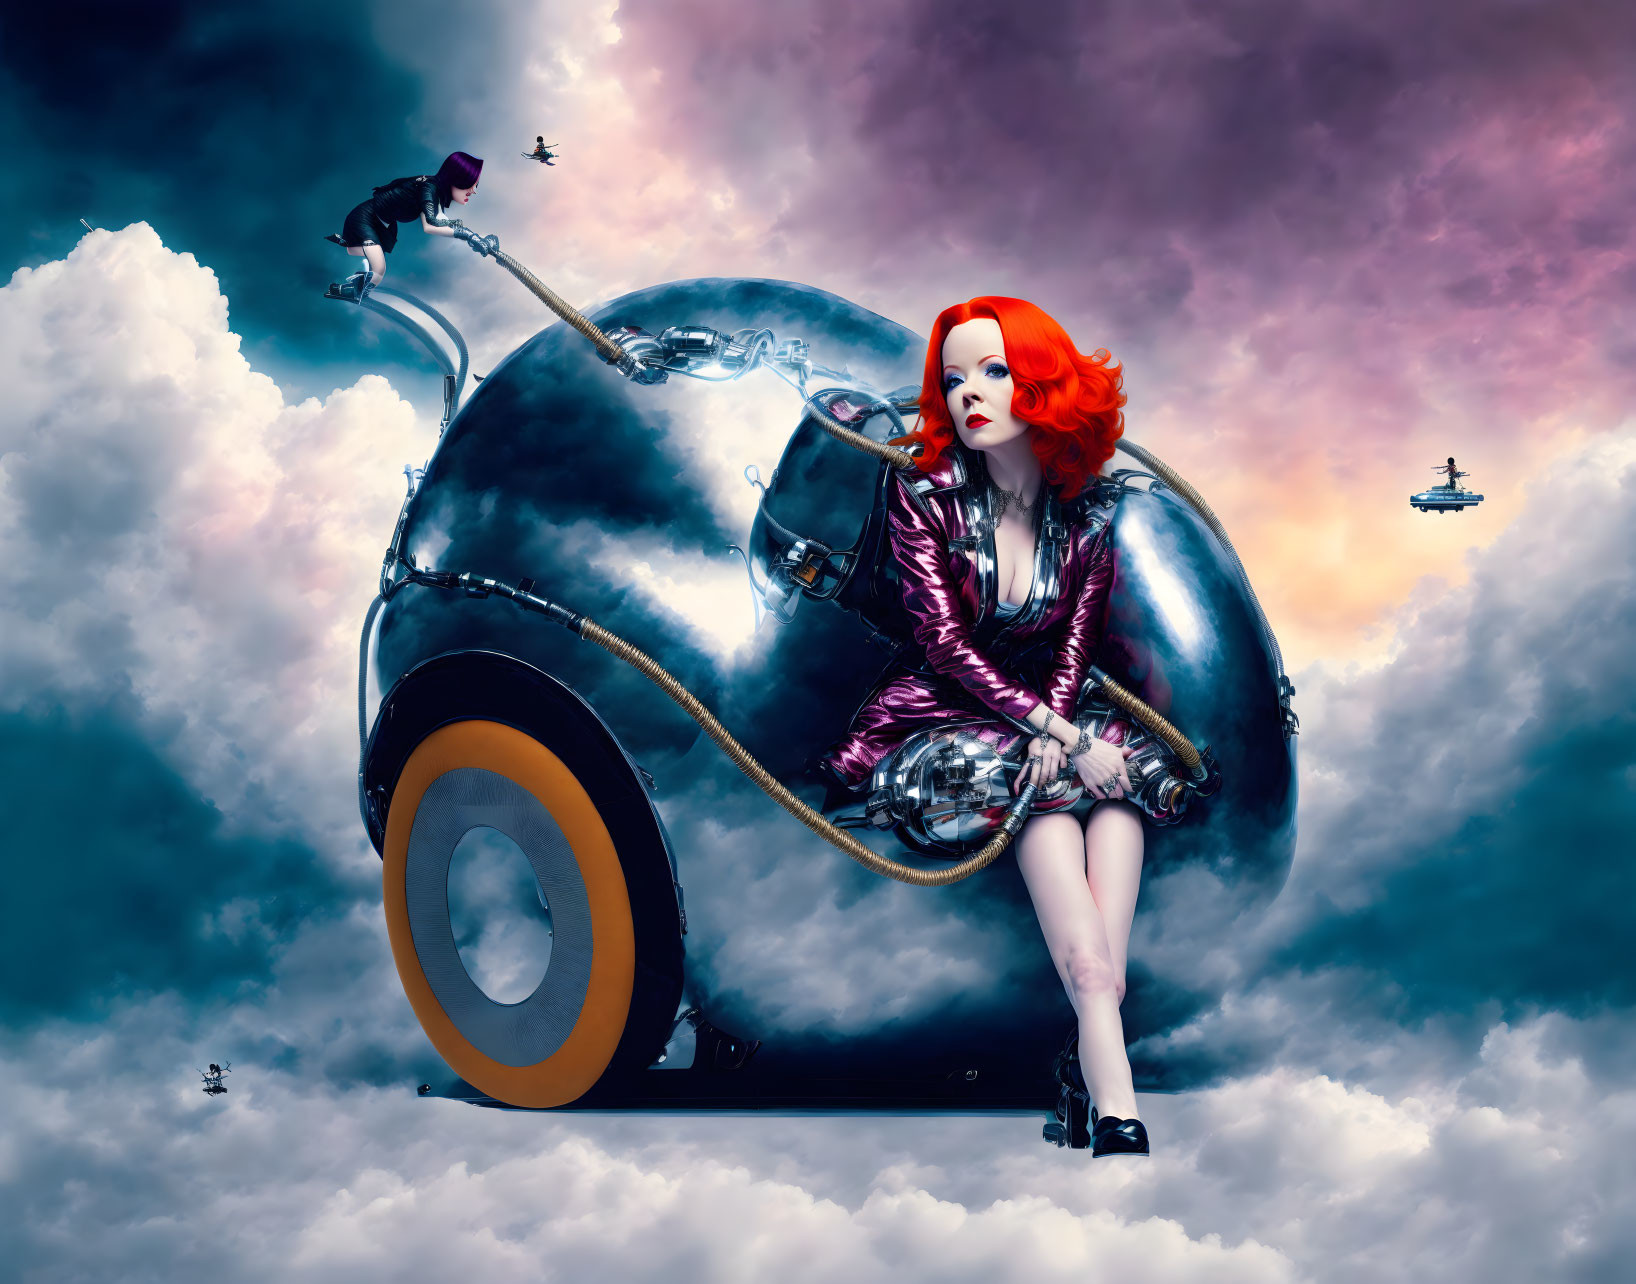 Surreal image: Woman with red hair on chrome structure in cloudy sky